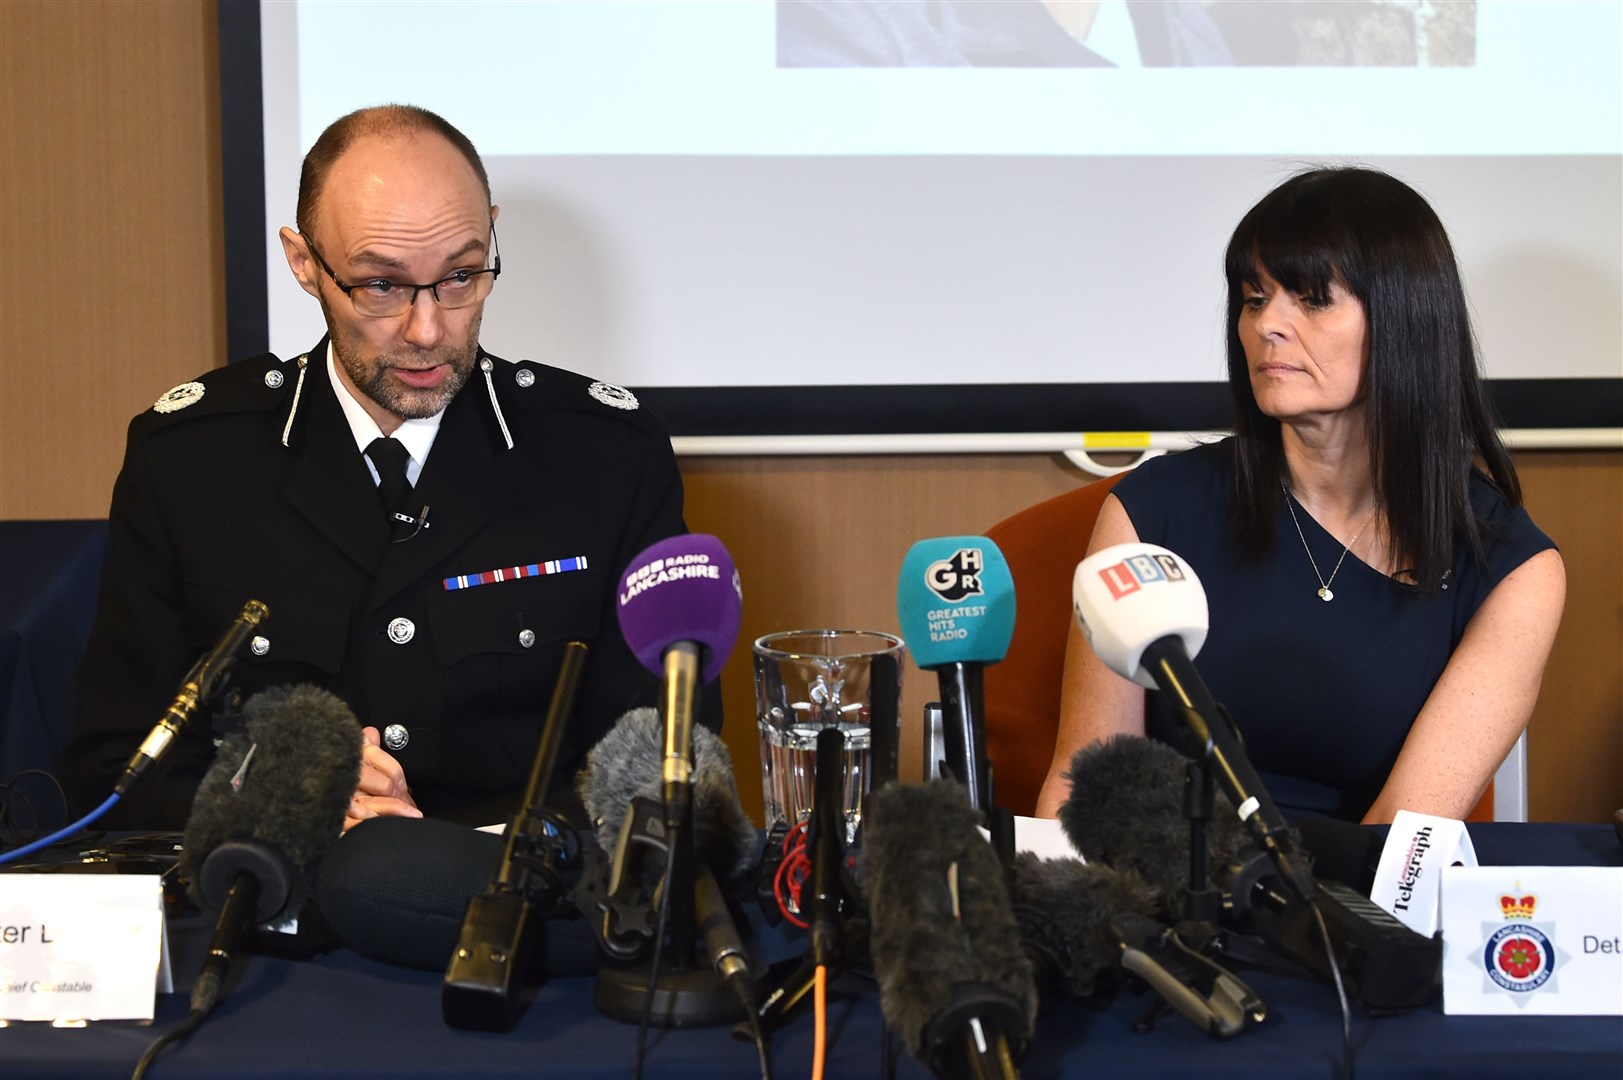 Lancashire Police were criticised for disclosing Ms Bulley’s ‘significant issues with alcohol’ (Peter Powell/PA)